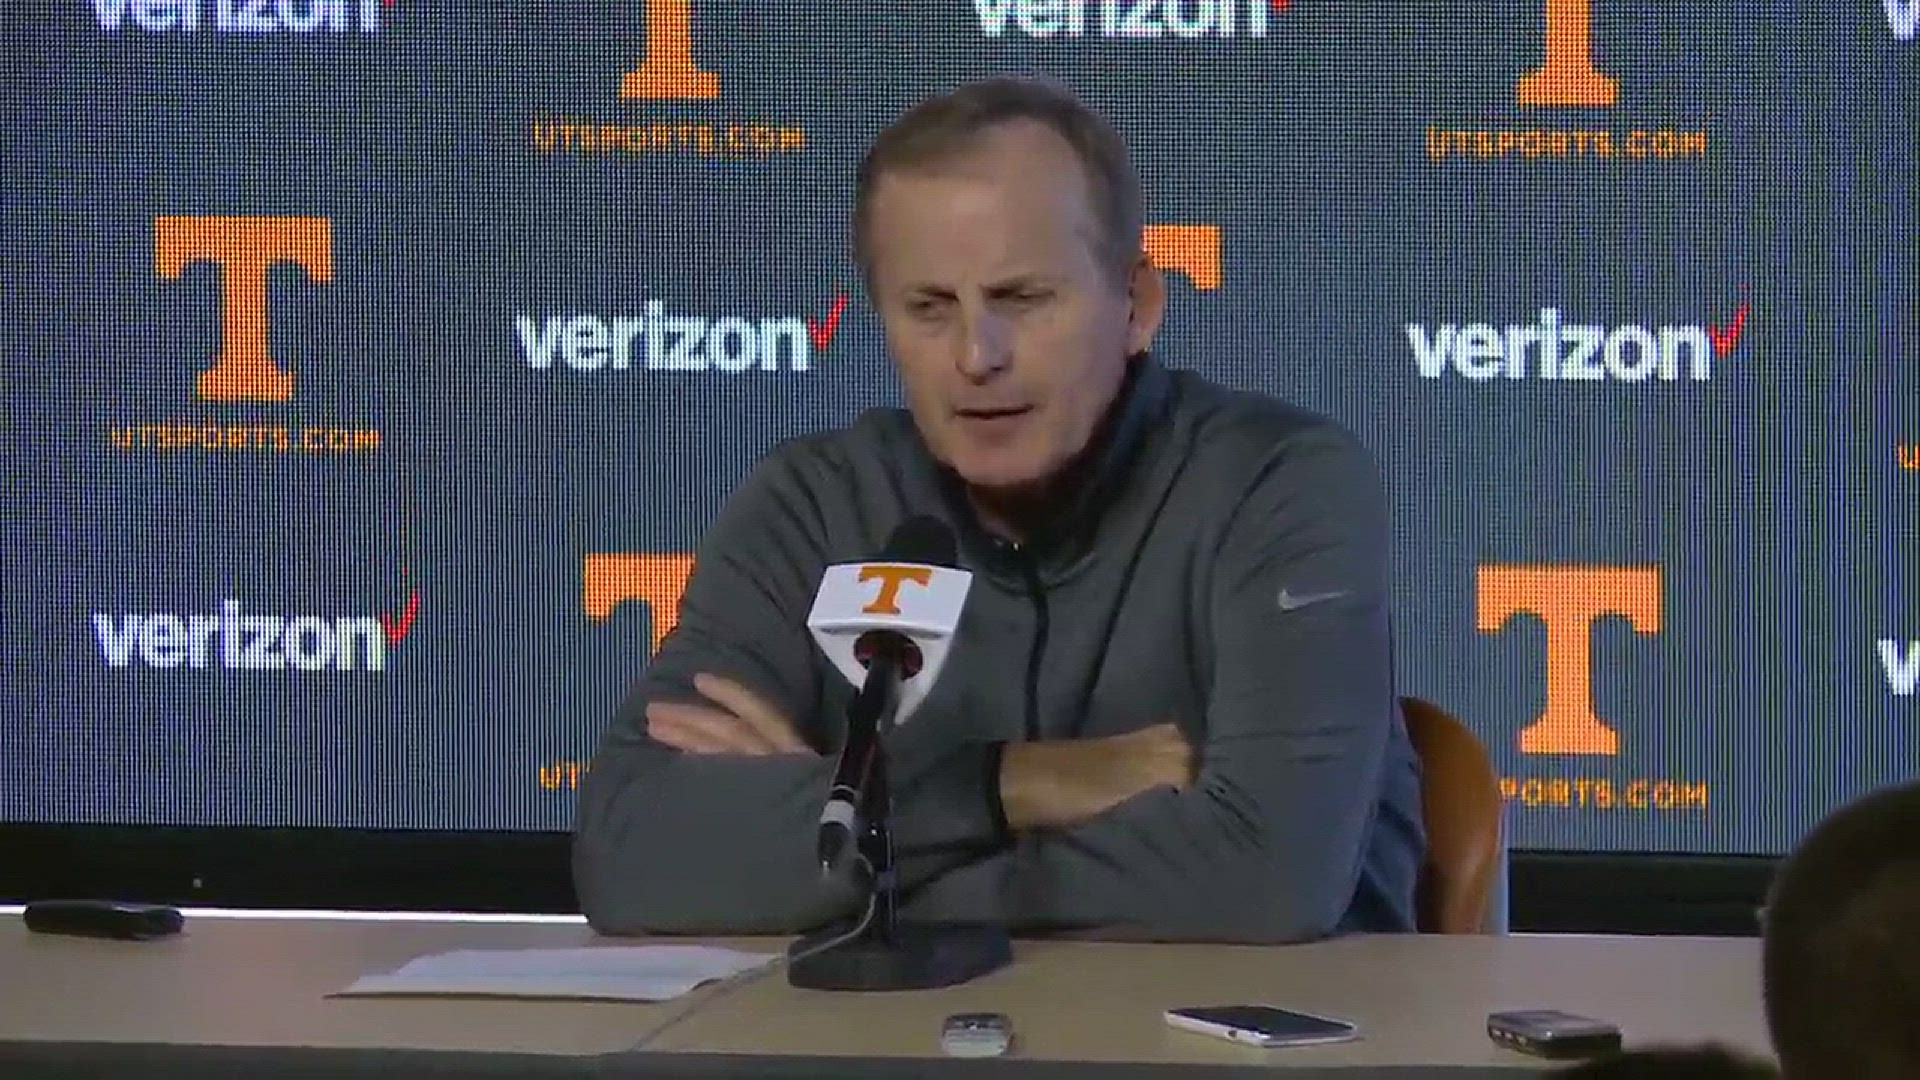 Tennessee head coach Rick Barnes comments on their upcoming matchup against the Wildcats.